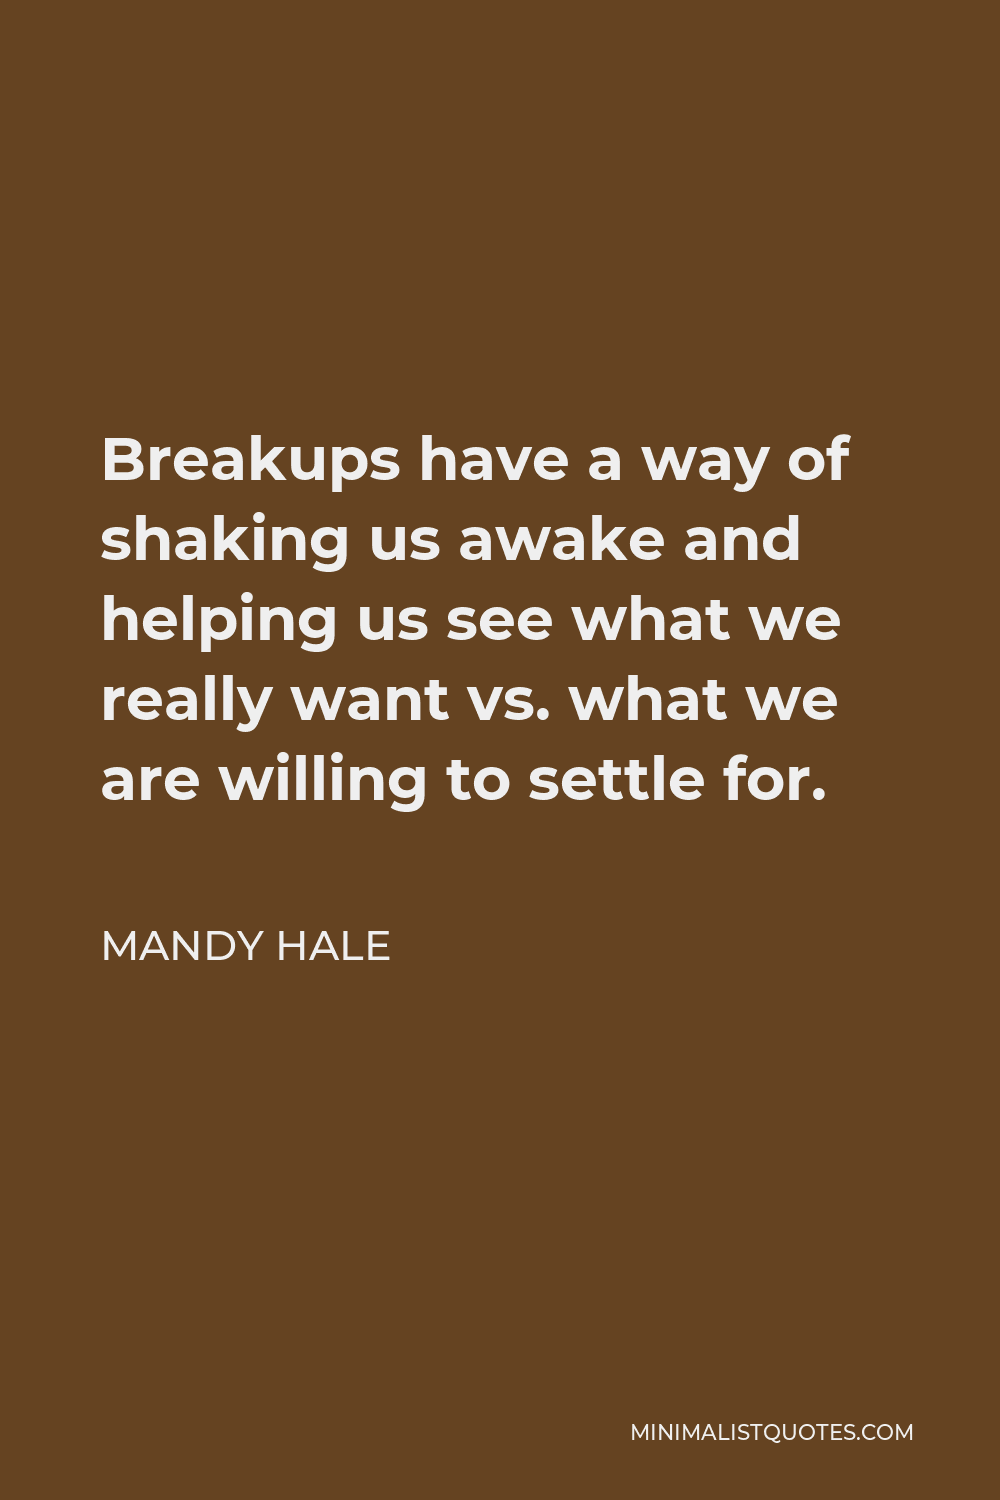 Mandy Hale Quote - Breakups have a way of shaking us awake and helping us see what we really want vs. what we are willing to settle for.